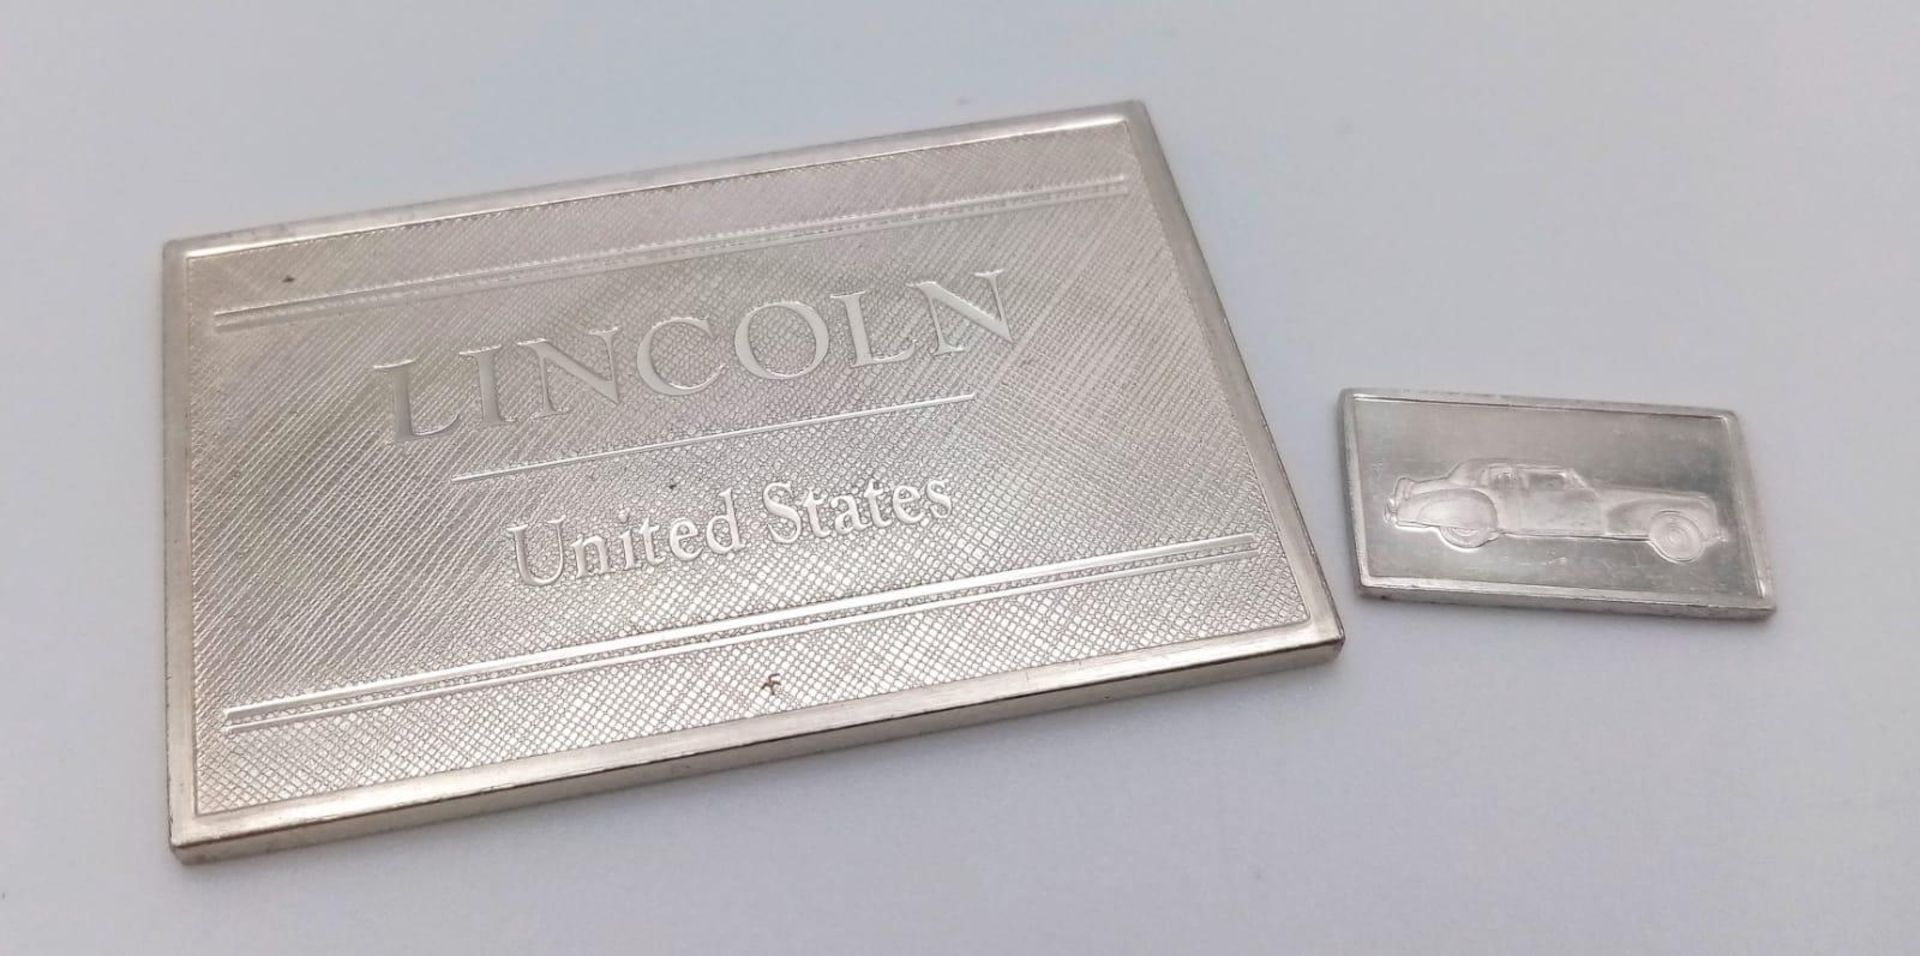 2 X STERLING SILVER AND ENAMEL LINCOLN CAR MANUFACTURER PLAQUES, MADE IN UNITED STATES USA, WEIGHT - Image 2 of 4